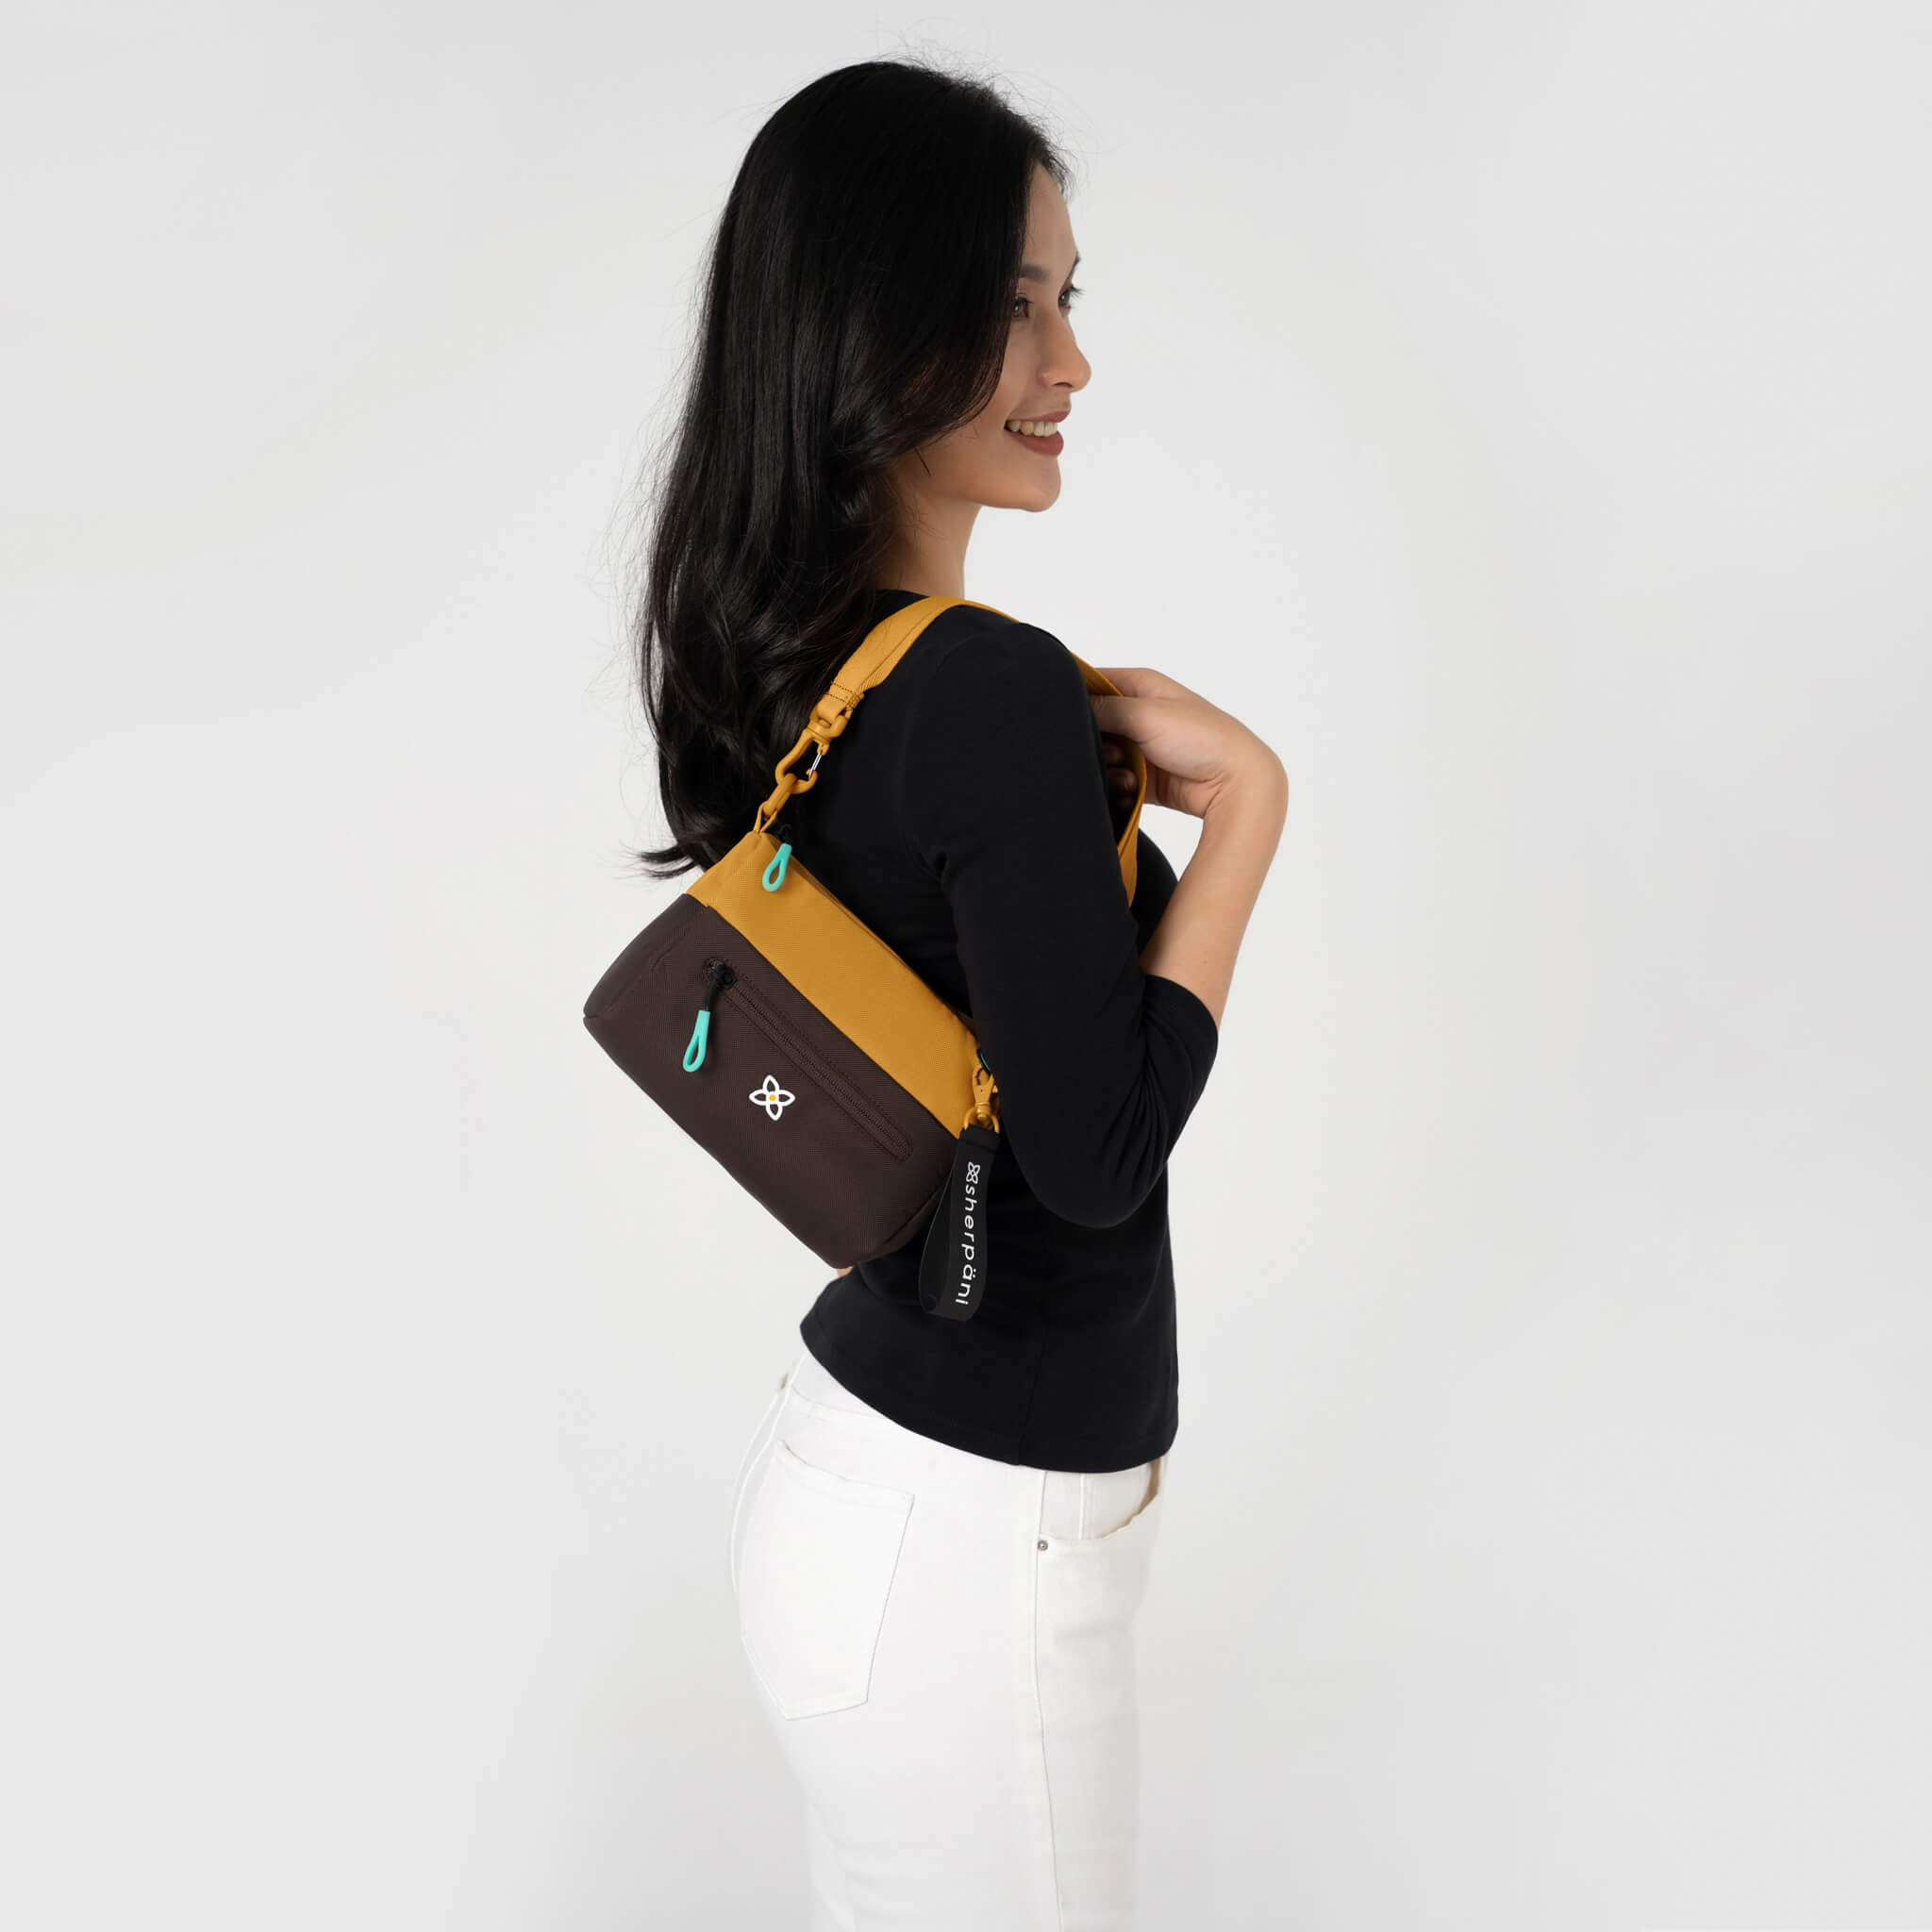 A model showing the small shoulder bag style of Sherpani handbag, the Skye in Sundial. 